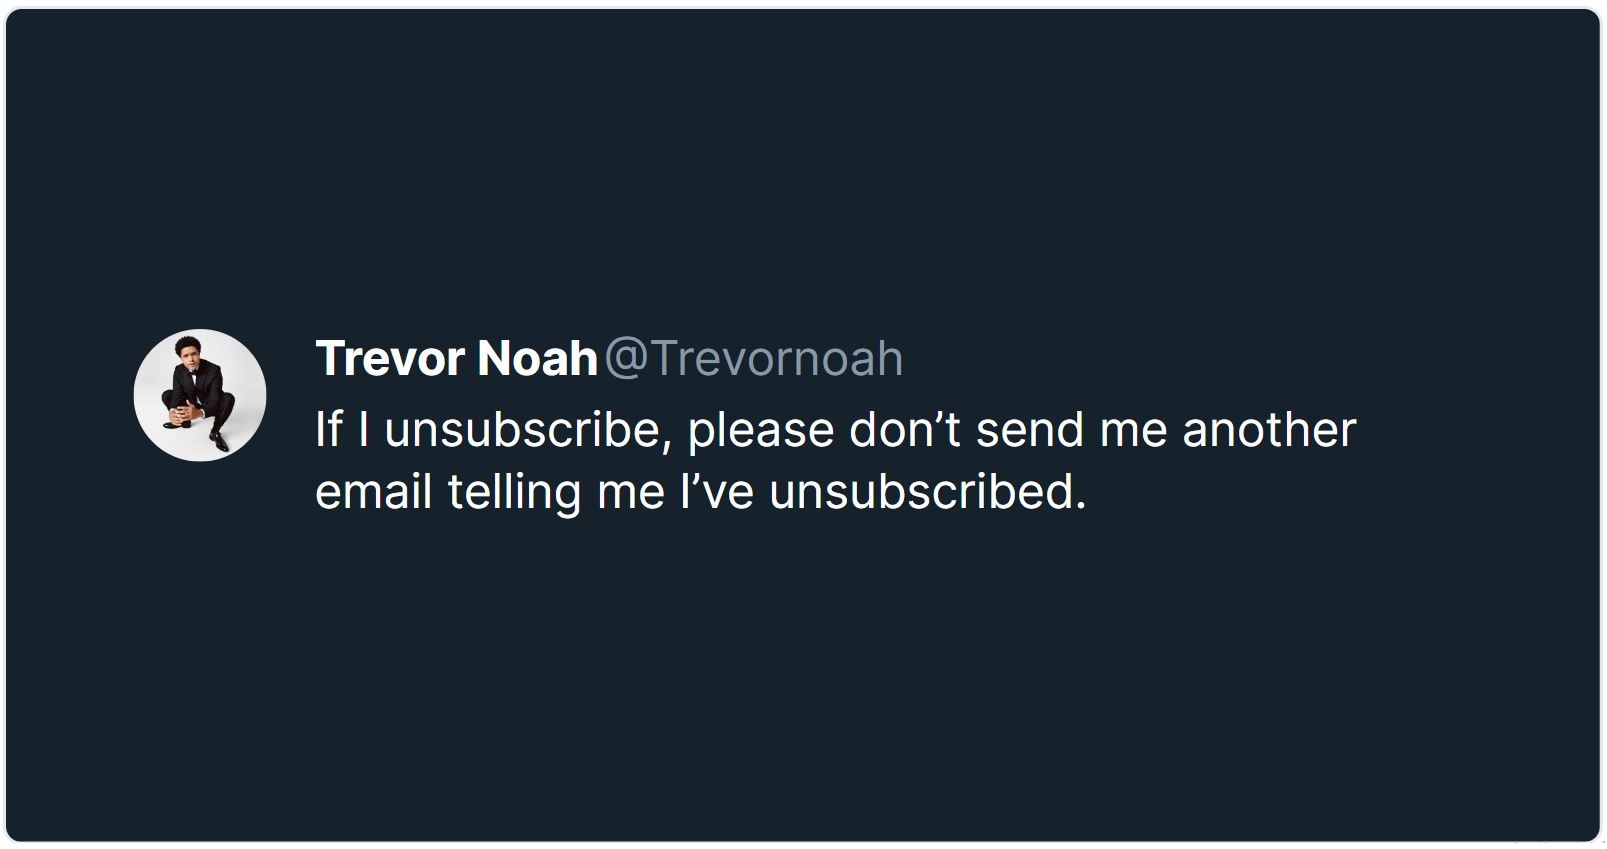 Trevor Noah: Don’t send unsubscribe confirmation email